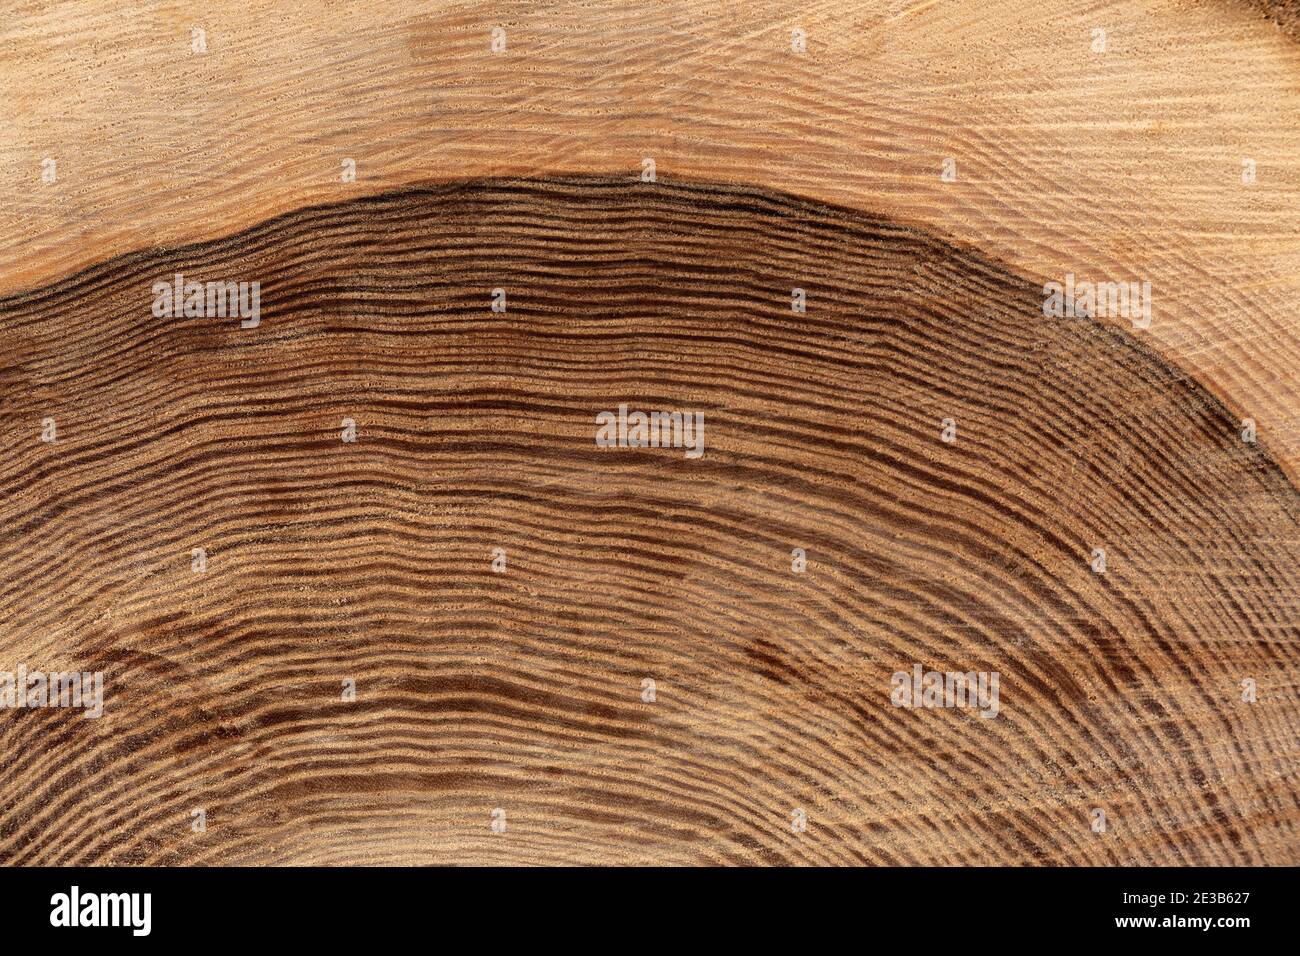 Detail of the annual rings of a tree trunk with dark core Stock Photo